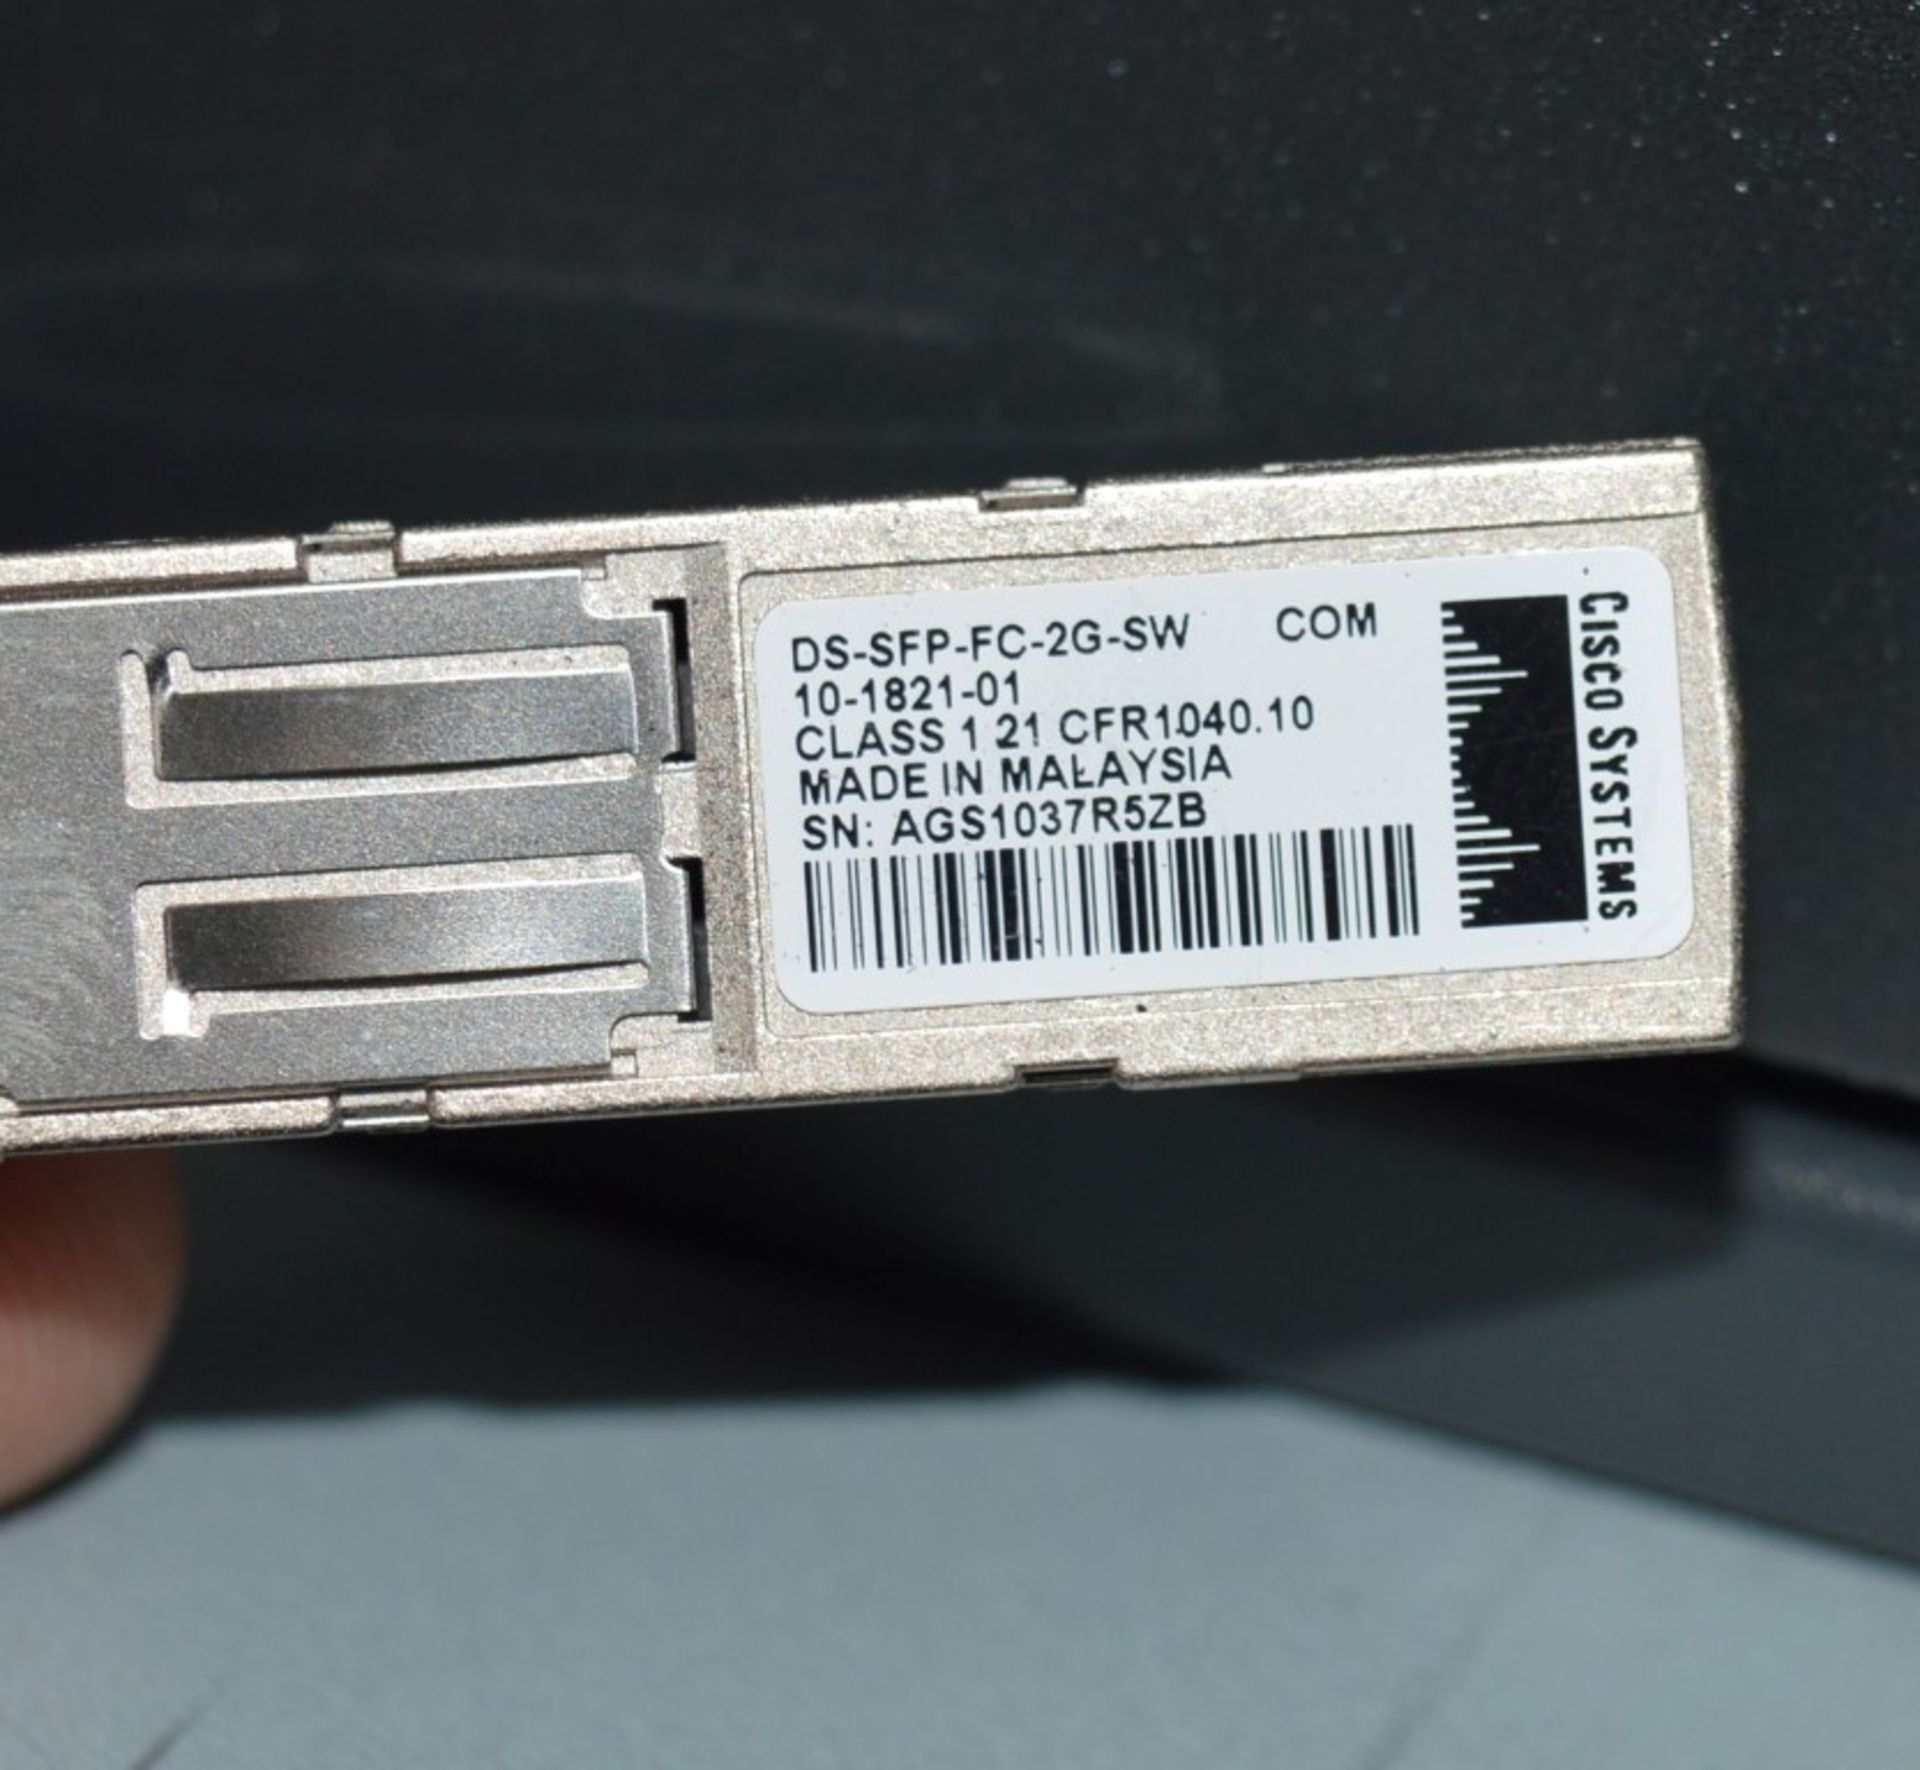 1 x Cisco Systems MDS 9216 DS-C9200 Series Multiservice Fabric Switch - Includes 14 GBIC - Image 7 of 8